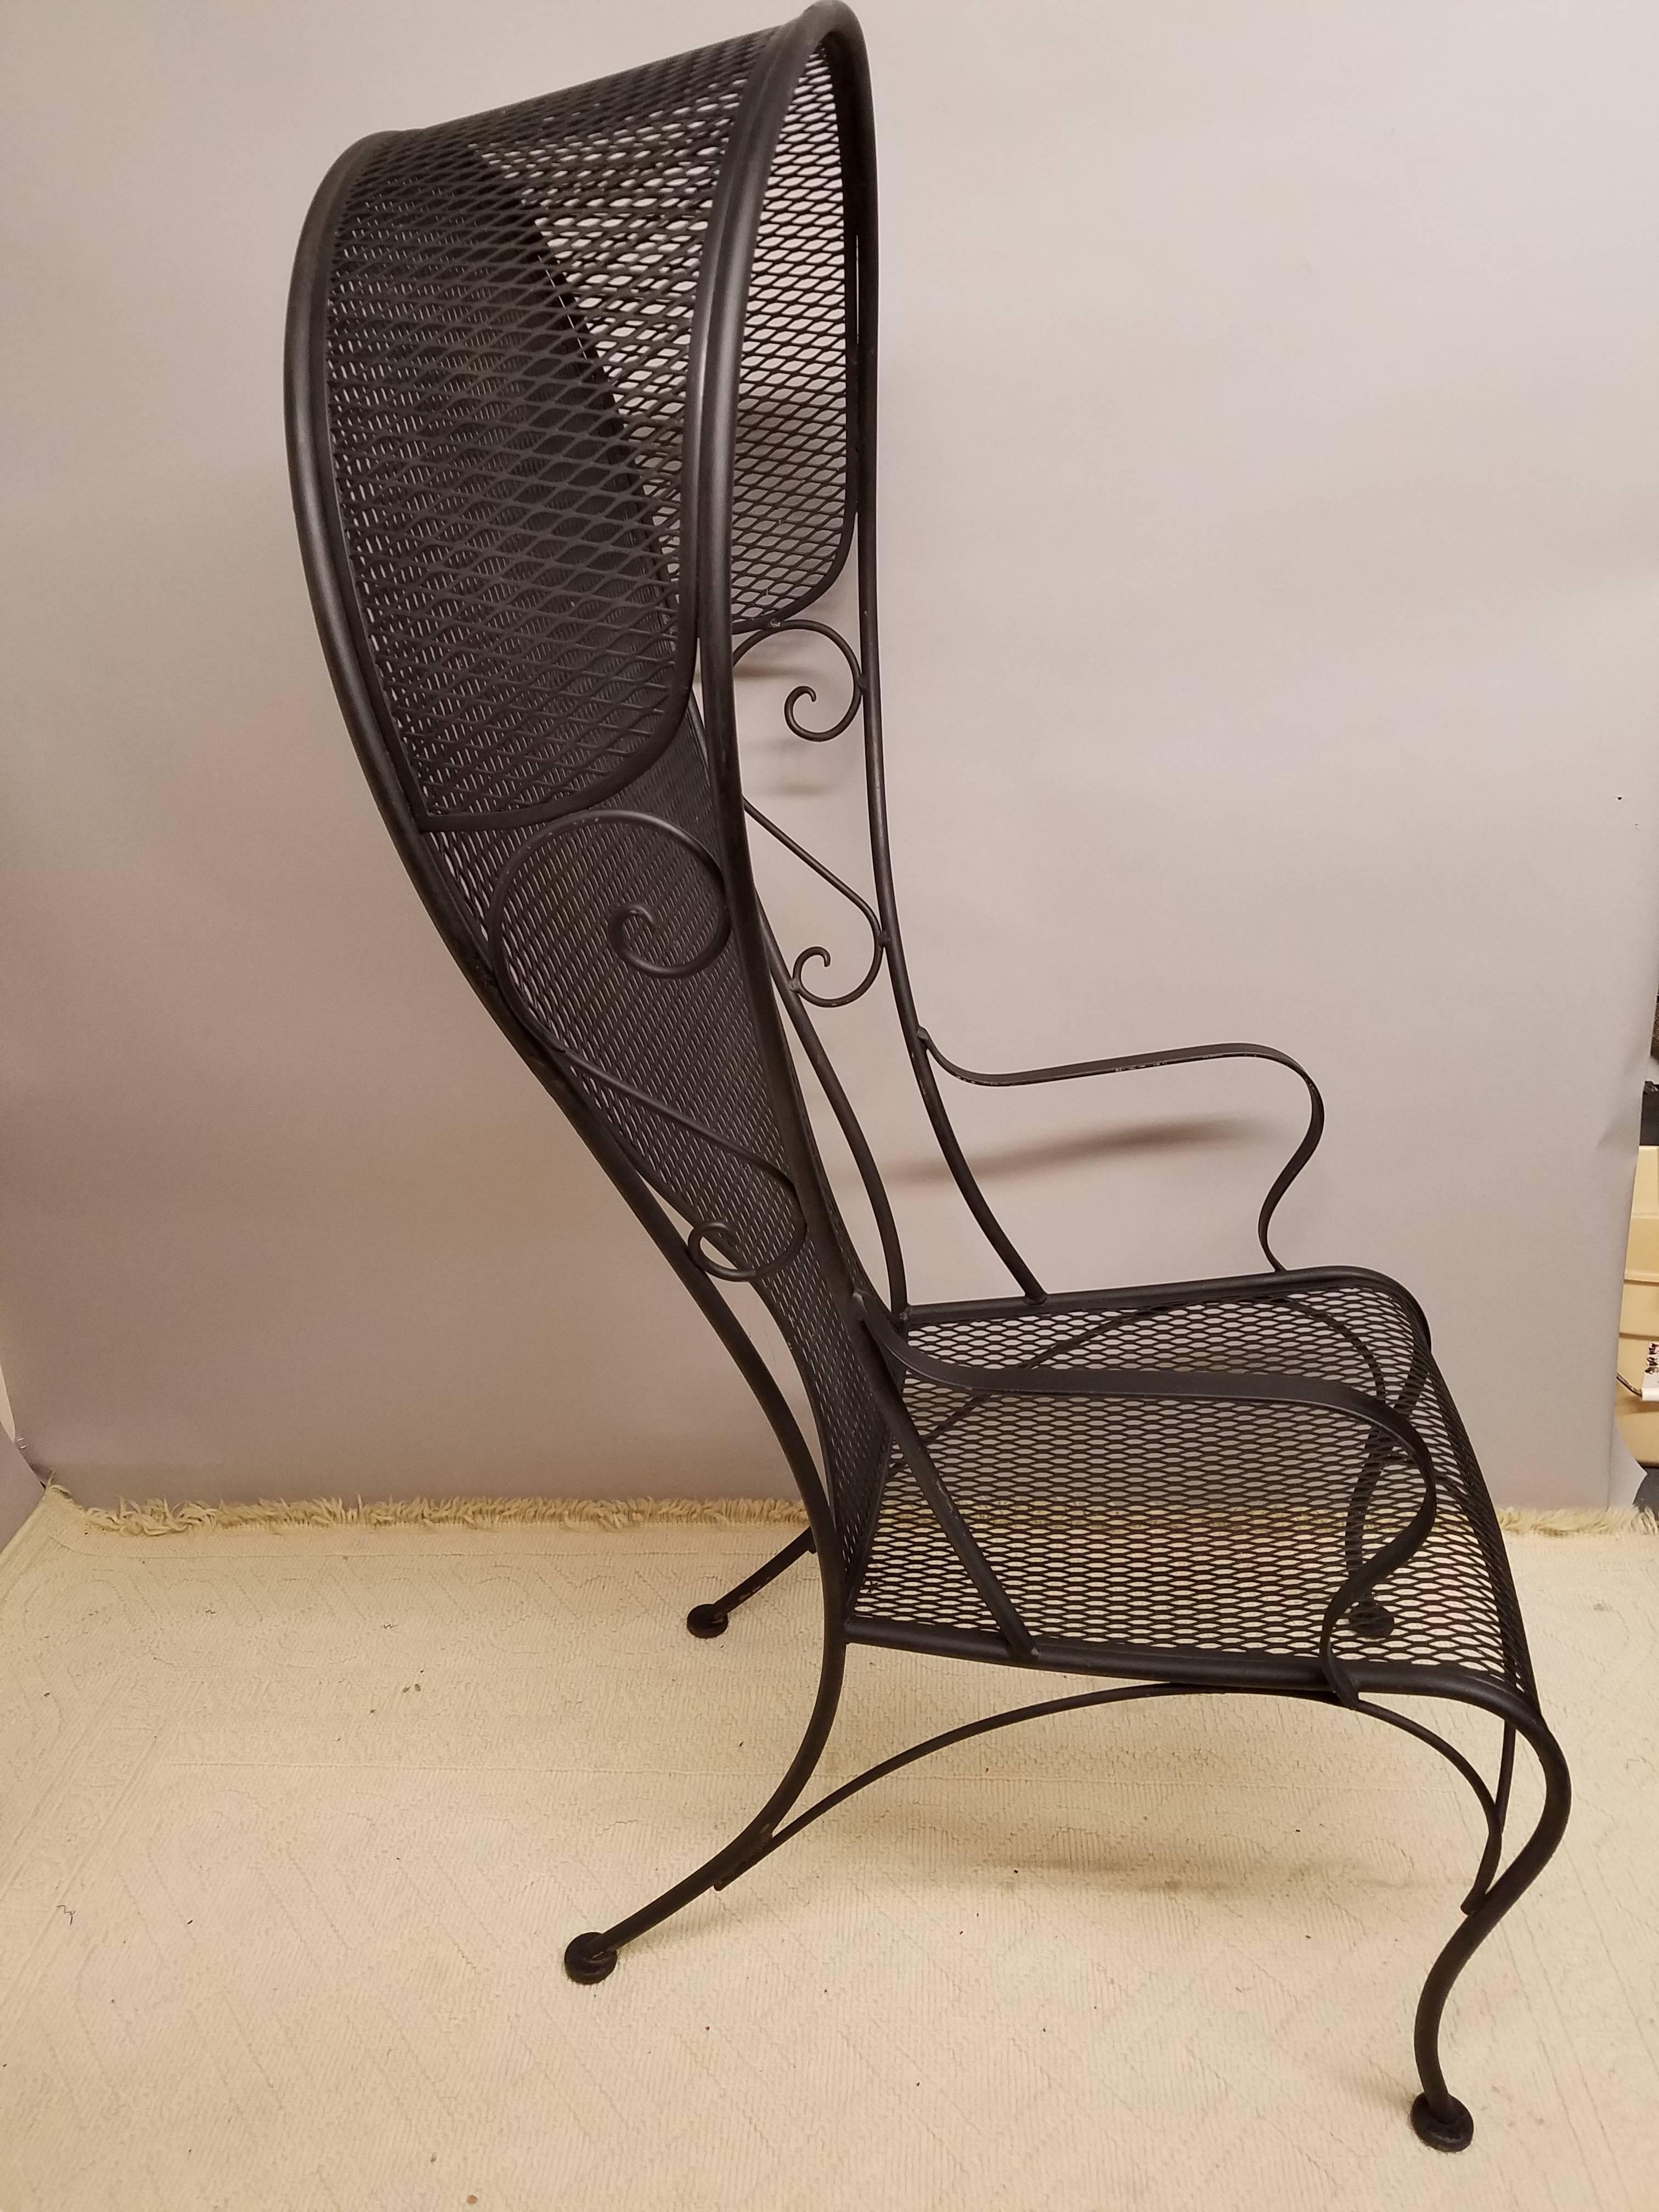 Wonderful high style and uncommon midcentury hooded iron garden chair. Flat black paint. The shapely hooded back with scrolled sides and shapely seat. Measures: Seat height is 16